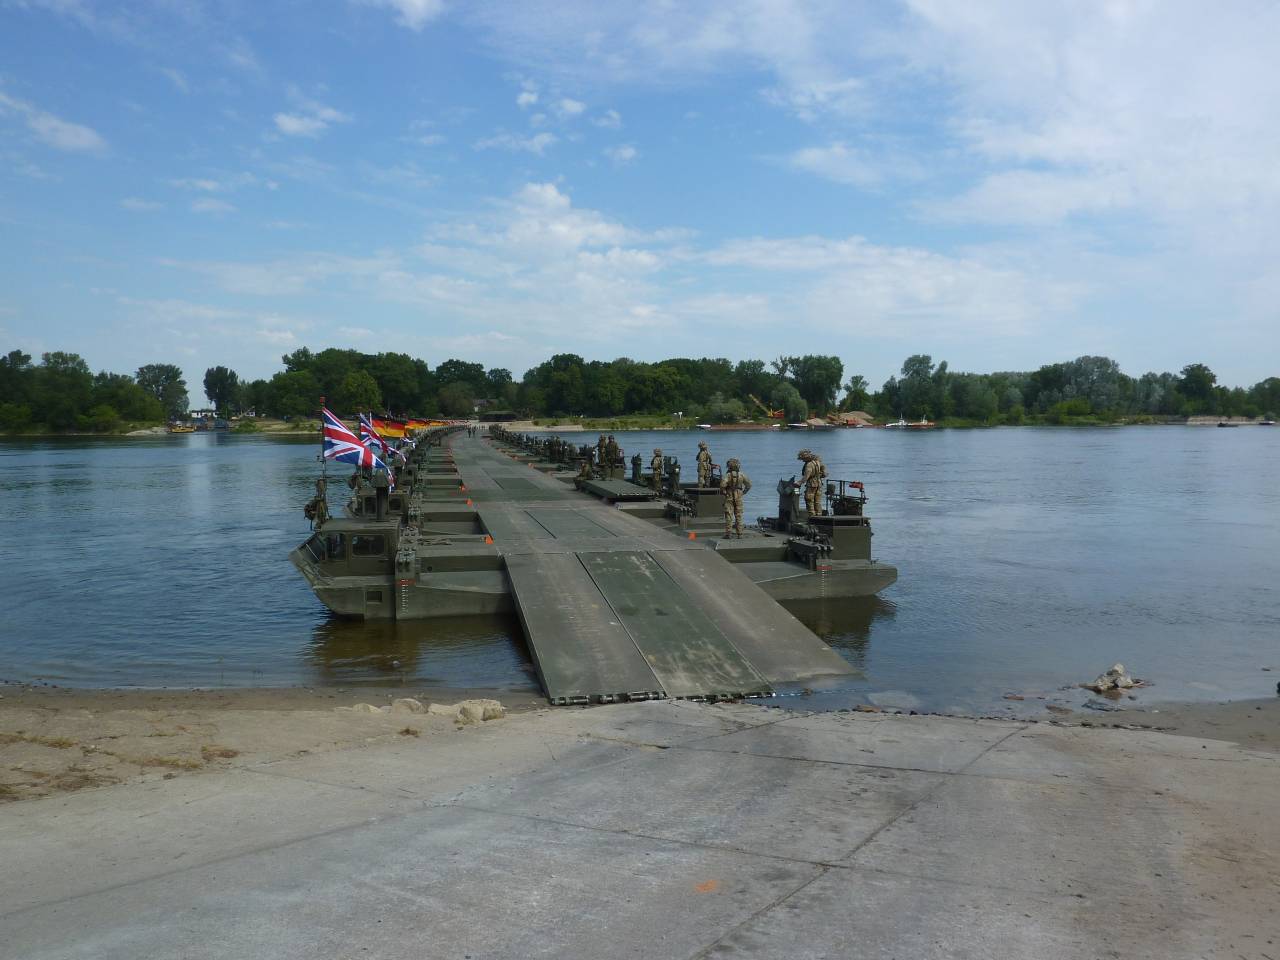 River crossing during Exercise Anaconda 2016. Source: General Dynamics European Land Systems.